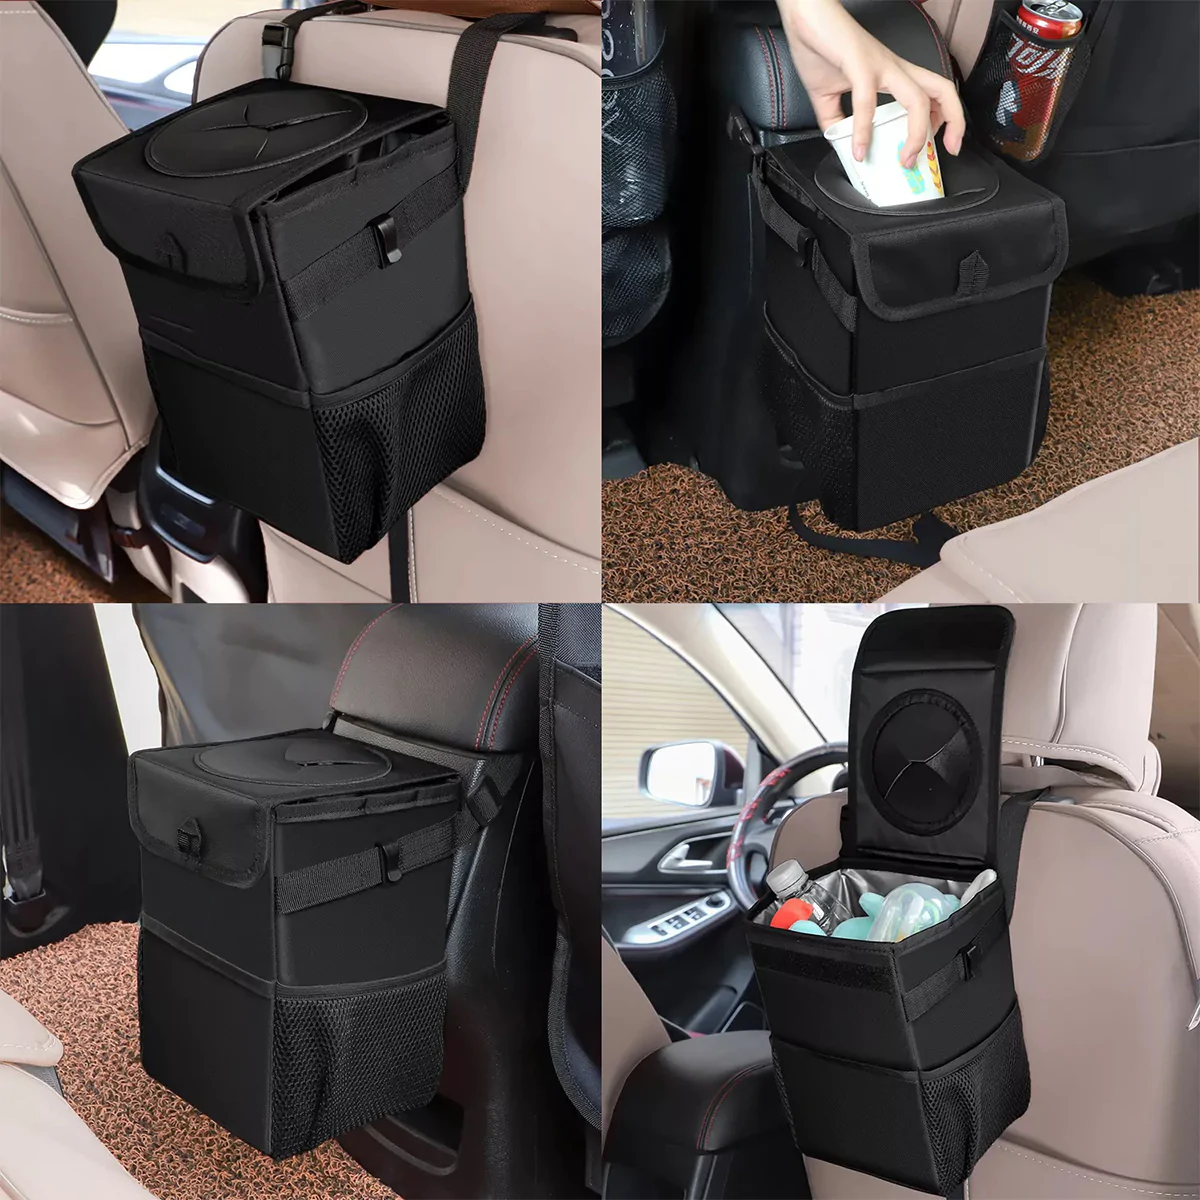 Waterproof Car Trash Can with Lid and Storage Pockets, Custom fit for 100% Leak-Proof Car Organizer, Waterproof Car Garbage Can, Multipurpose Trash Bin for Car